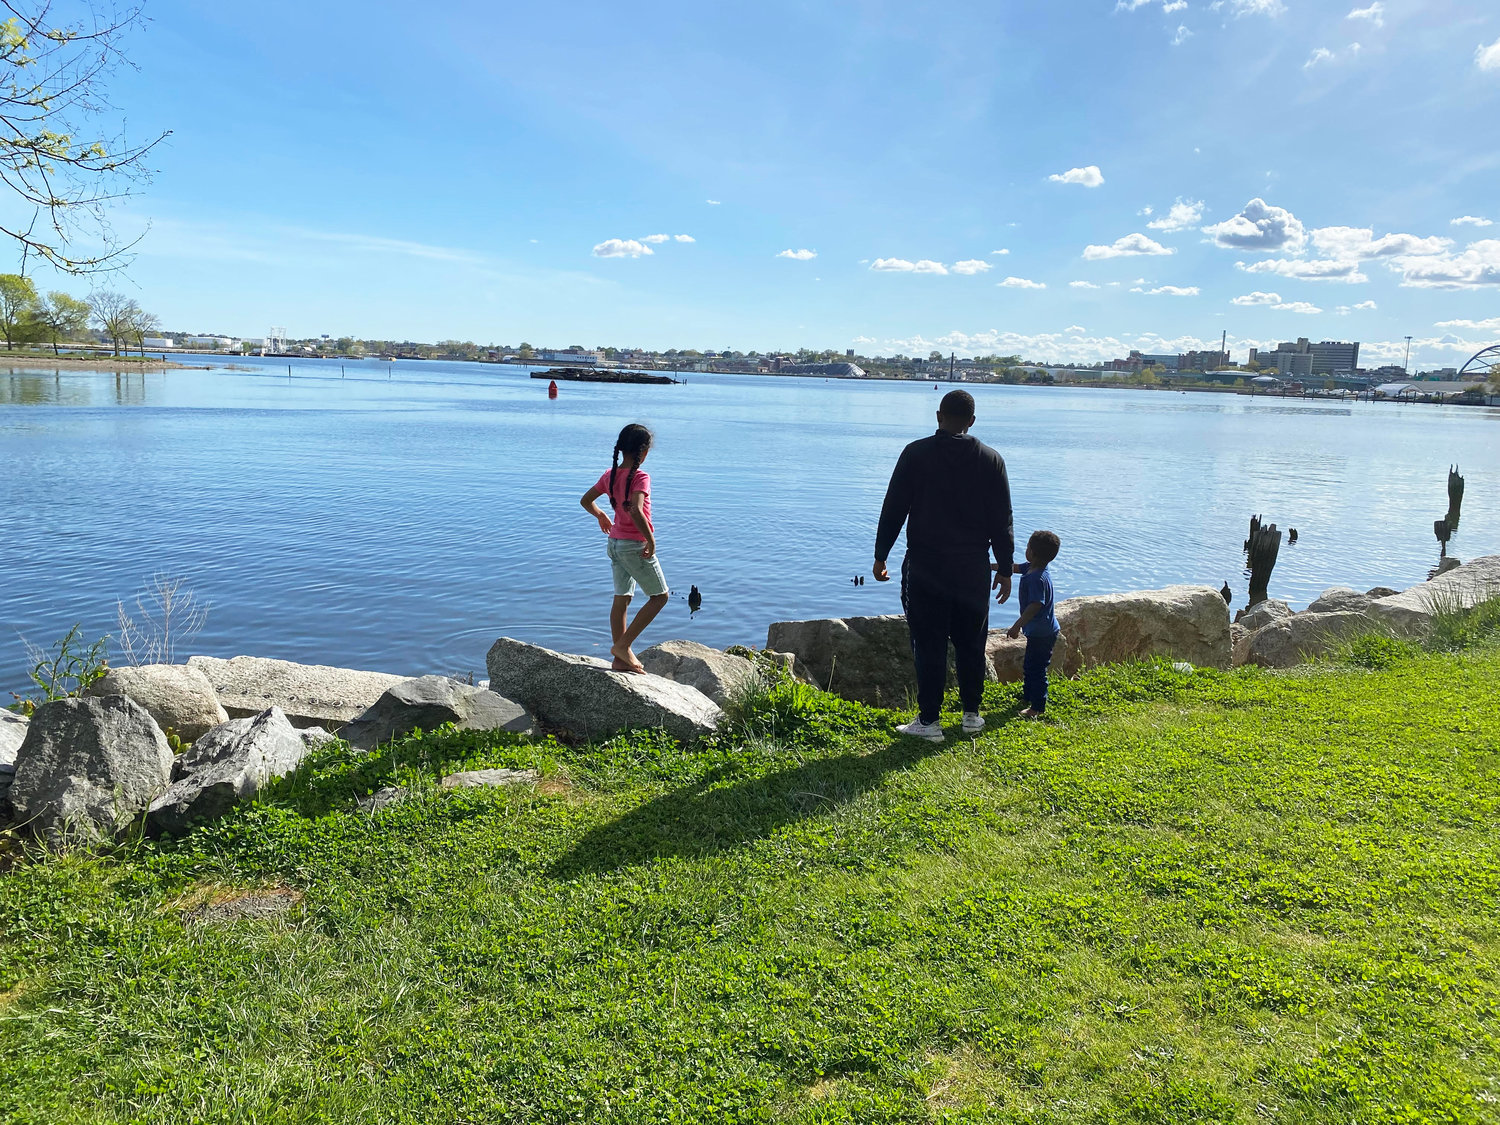 A family enjoys the late afternoon at India Point Park in Providence, at the edge of Narragansett Bay.